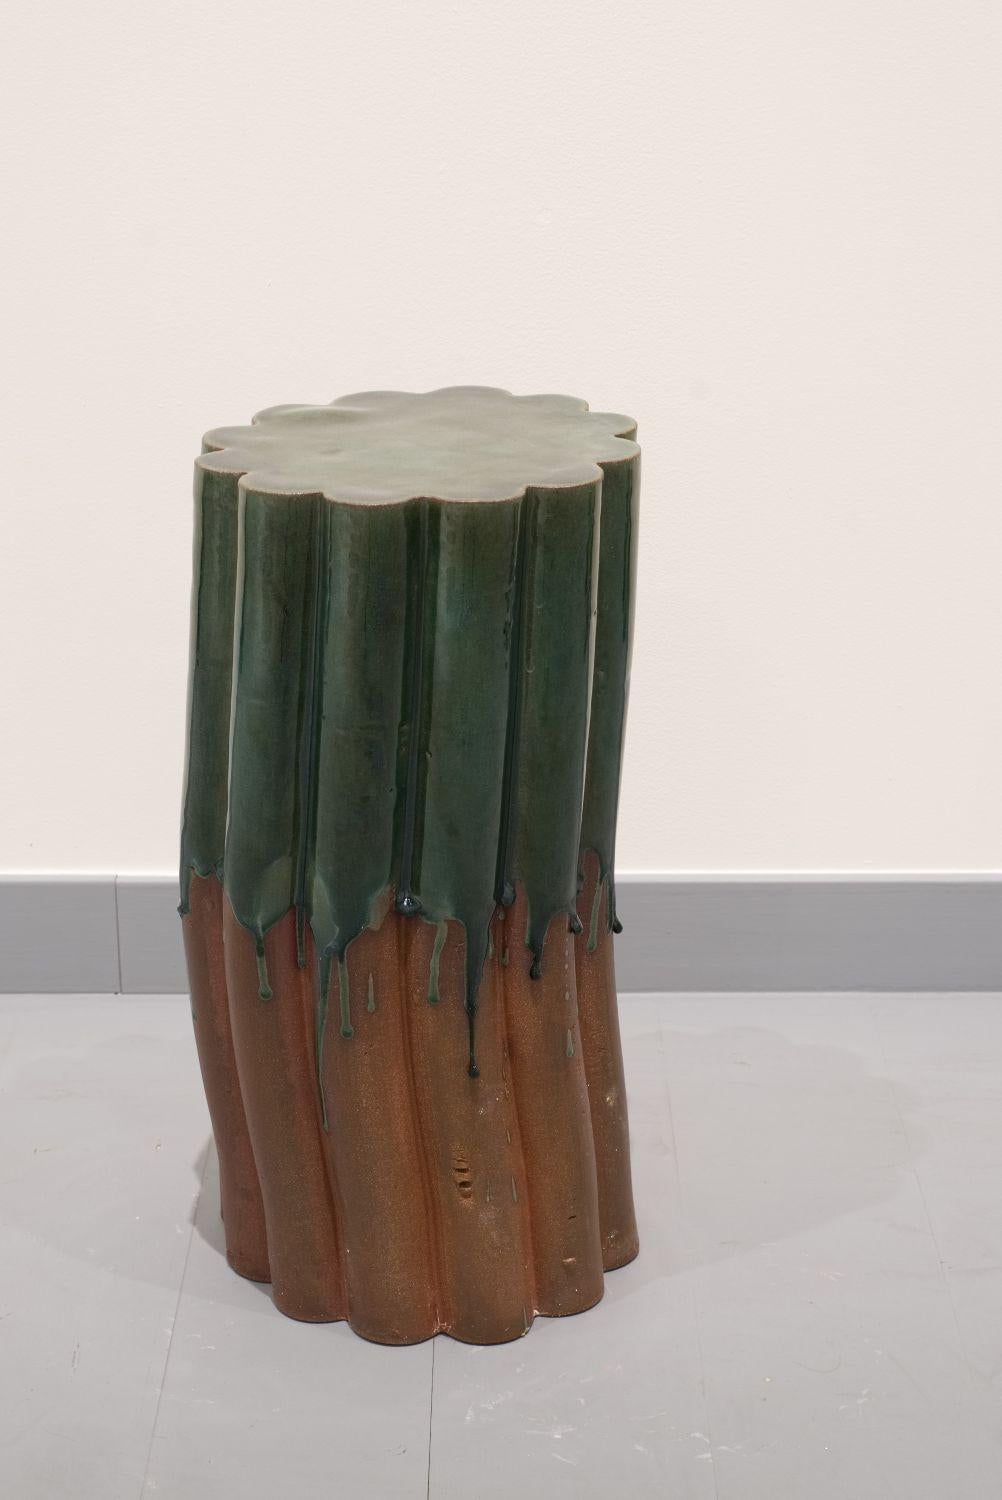 Glazed Set of 2 Element Vases, Tall and Pillar Stools by Milan Pekař